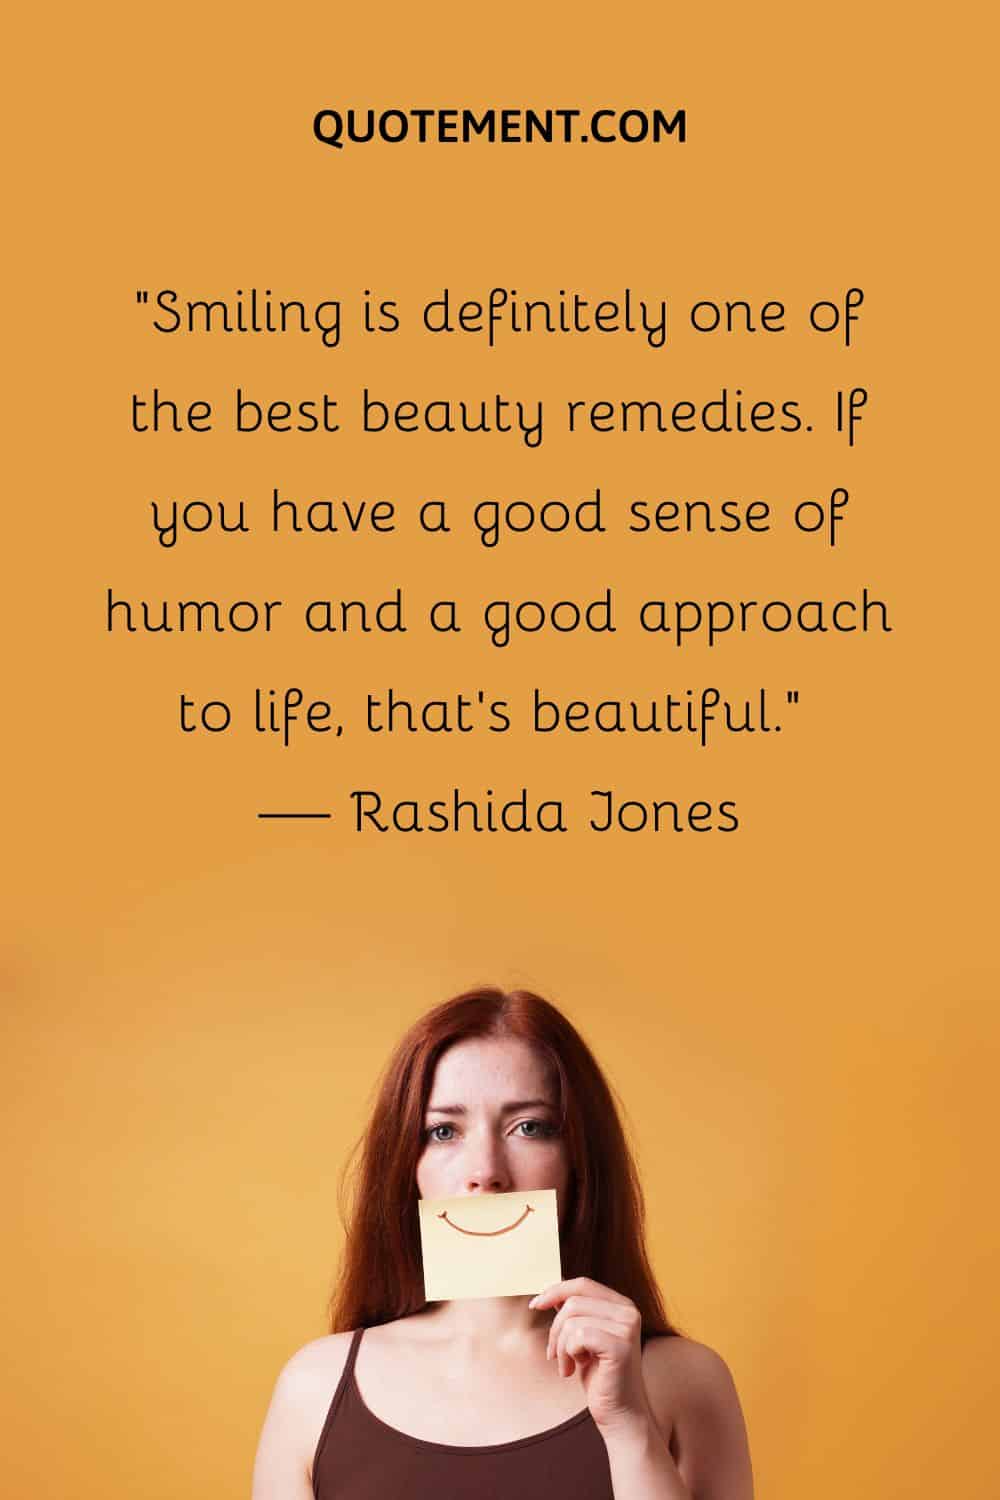 Smiling is definitely one of the best beauty remedies